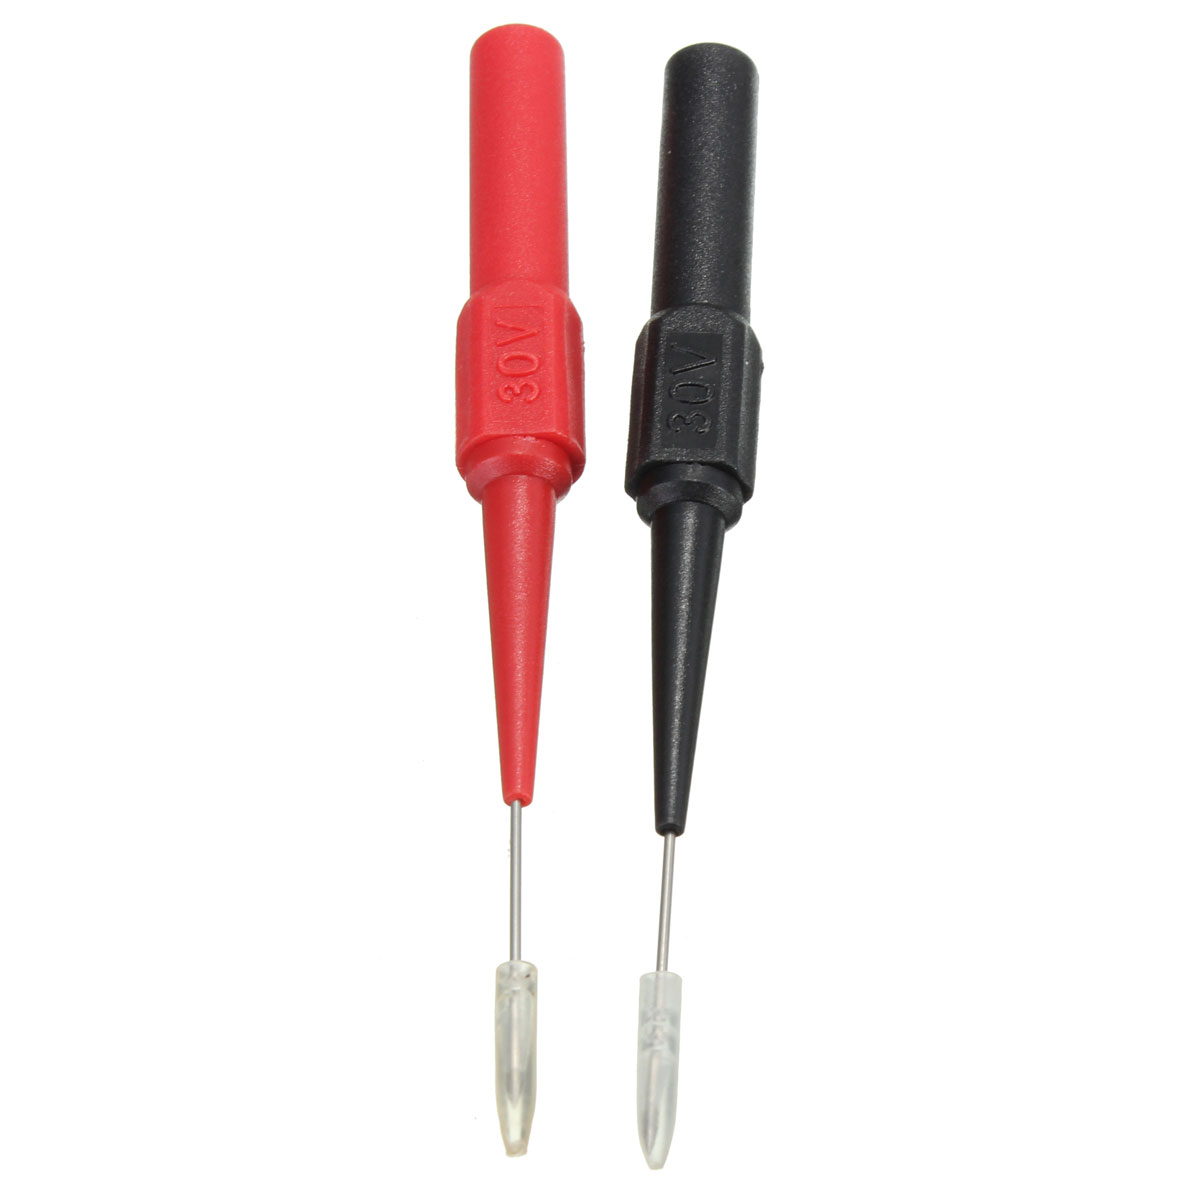 2pcs Fully Insulated Quick Piercing Test Needle Hook Multimeter Testing Probes